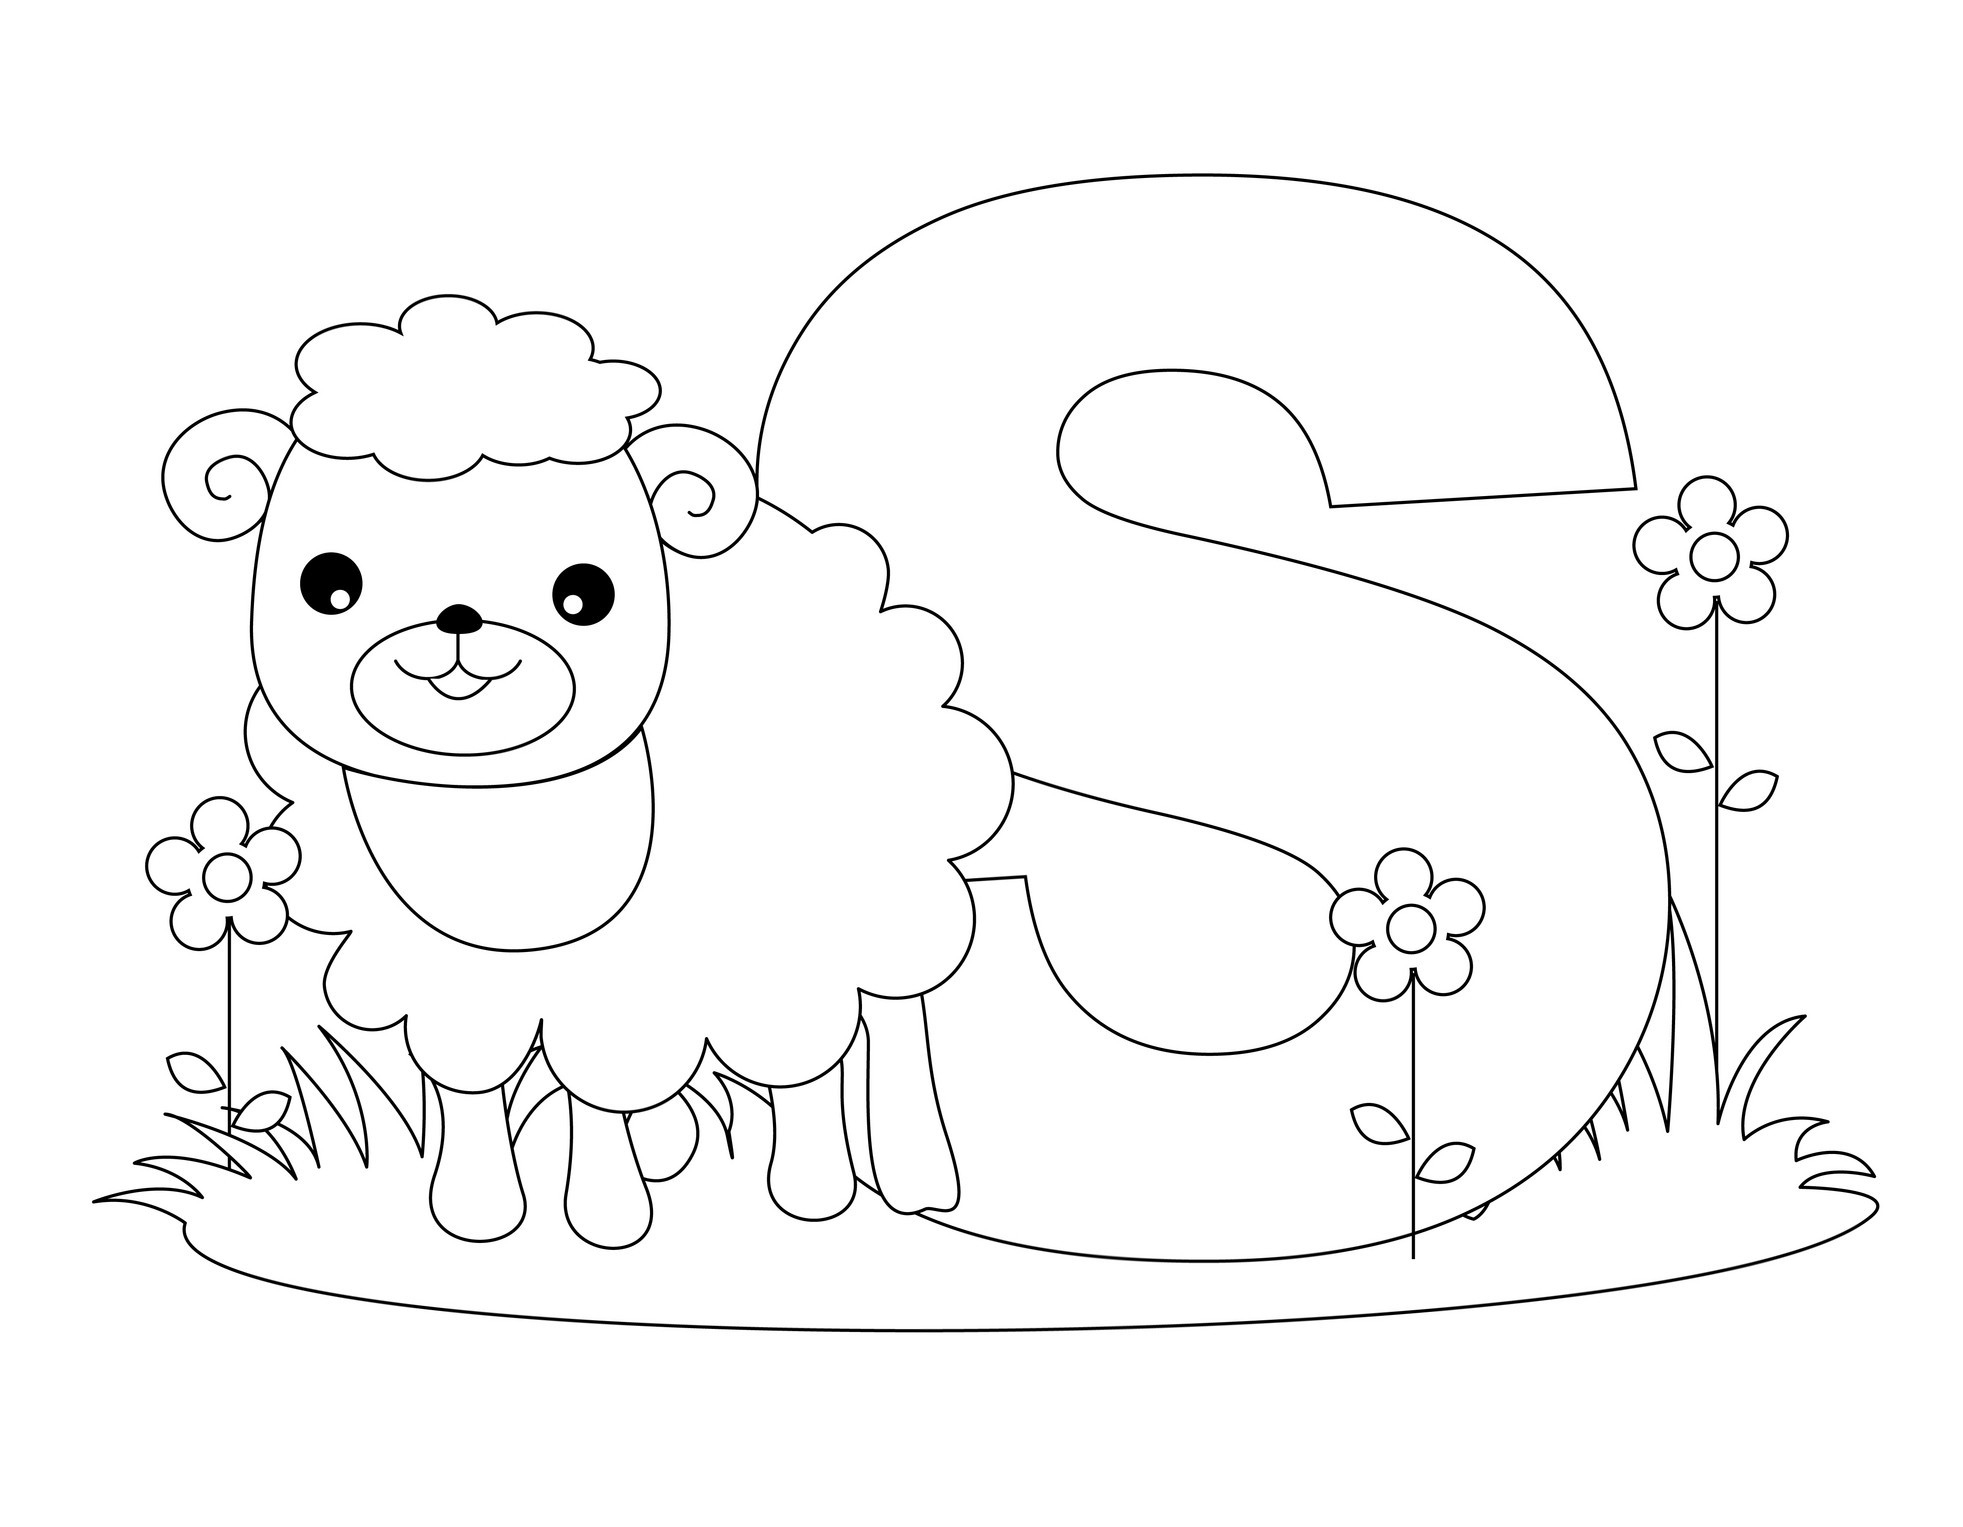  Free Coloring Pages Alphabet 4